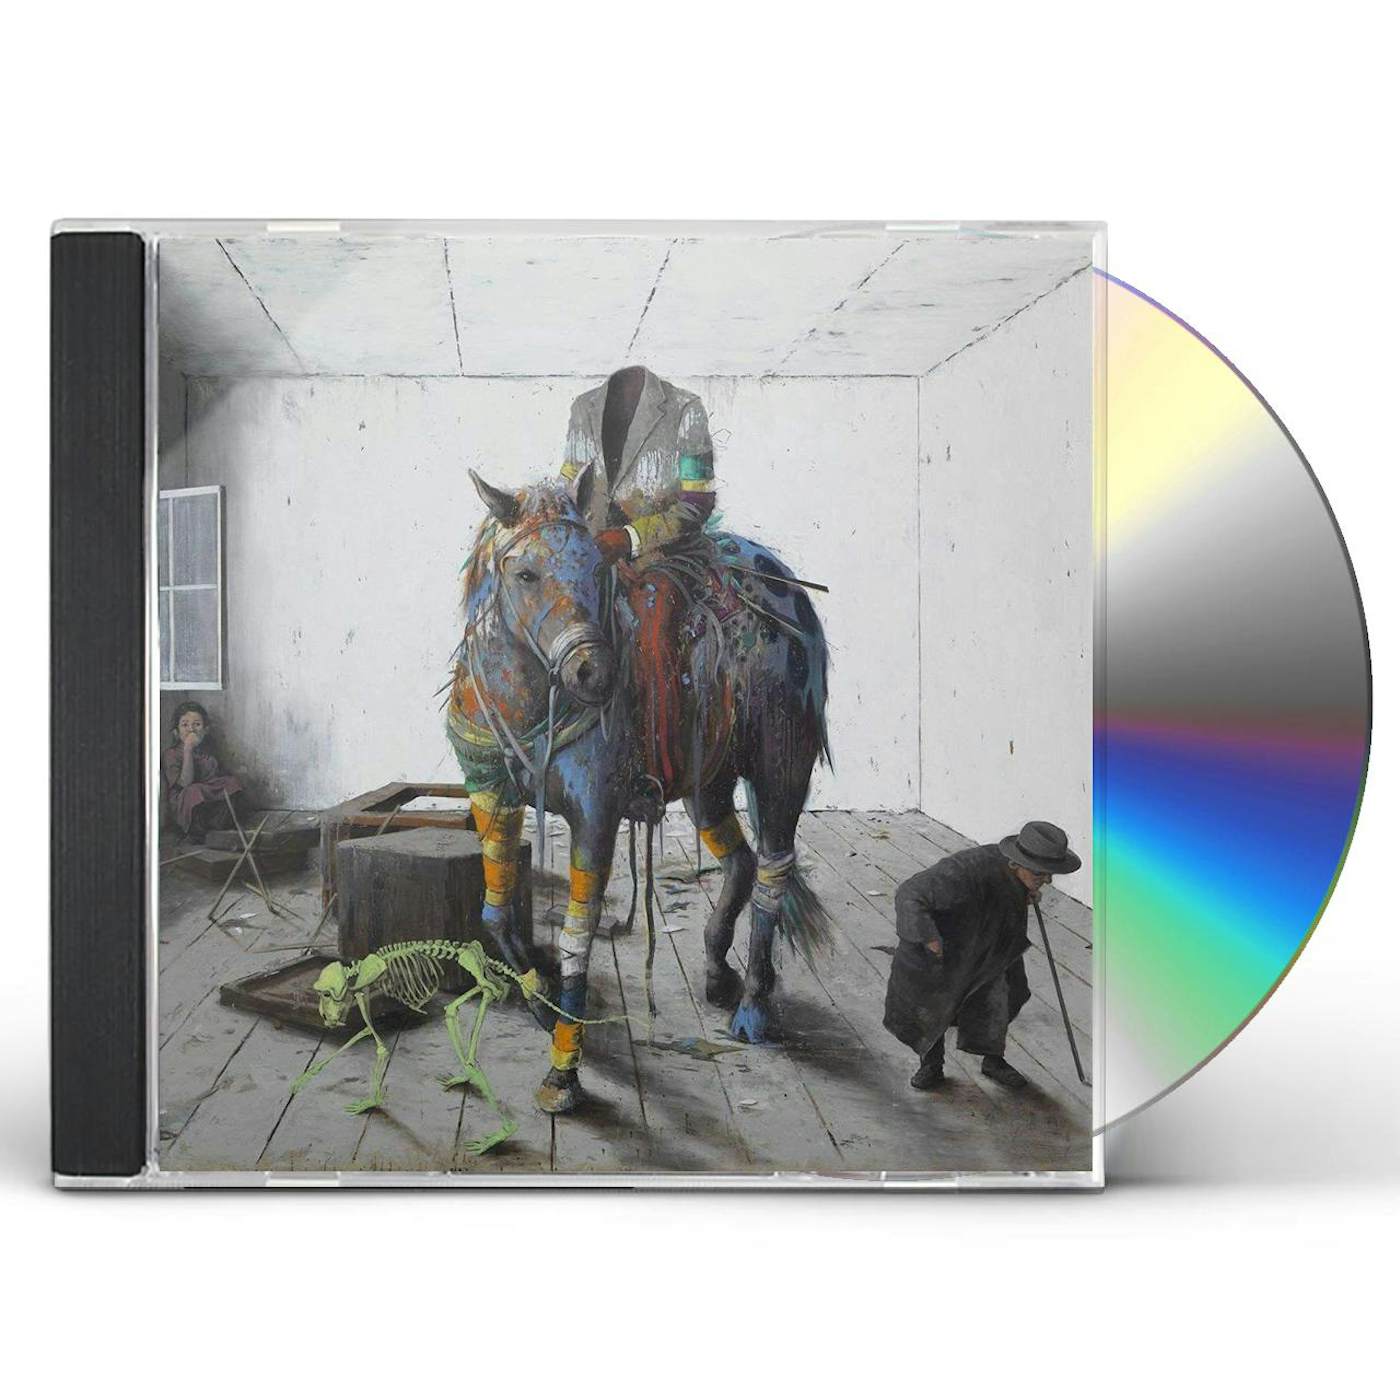 UNKLE The road: part i CD